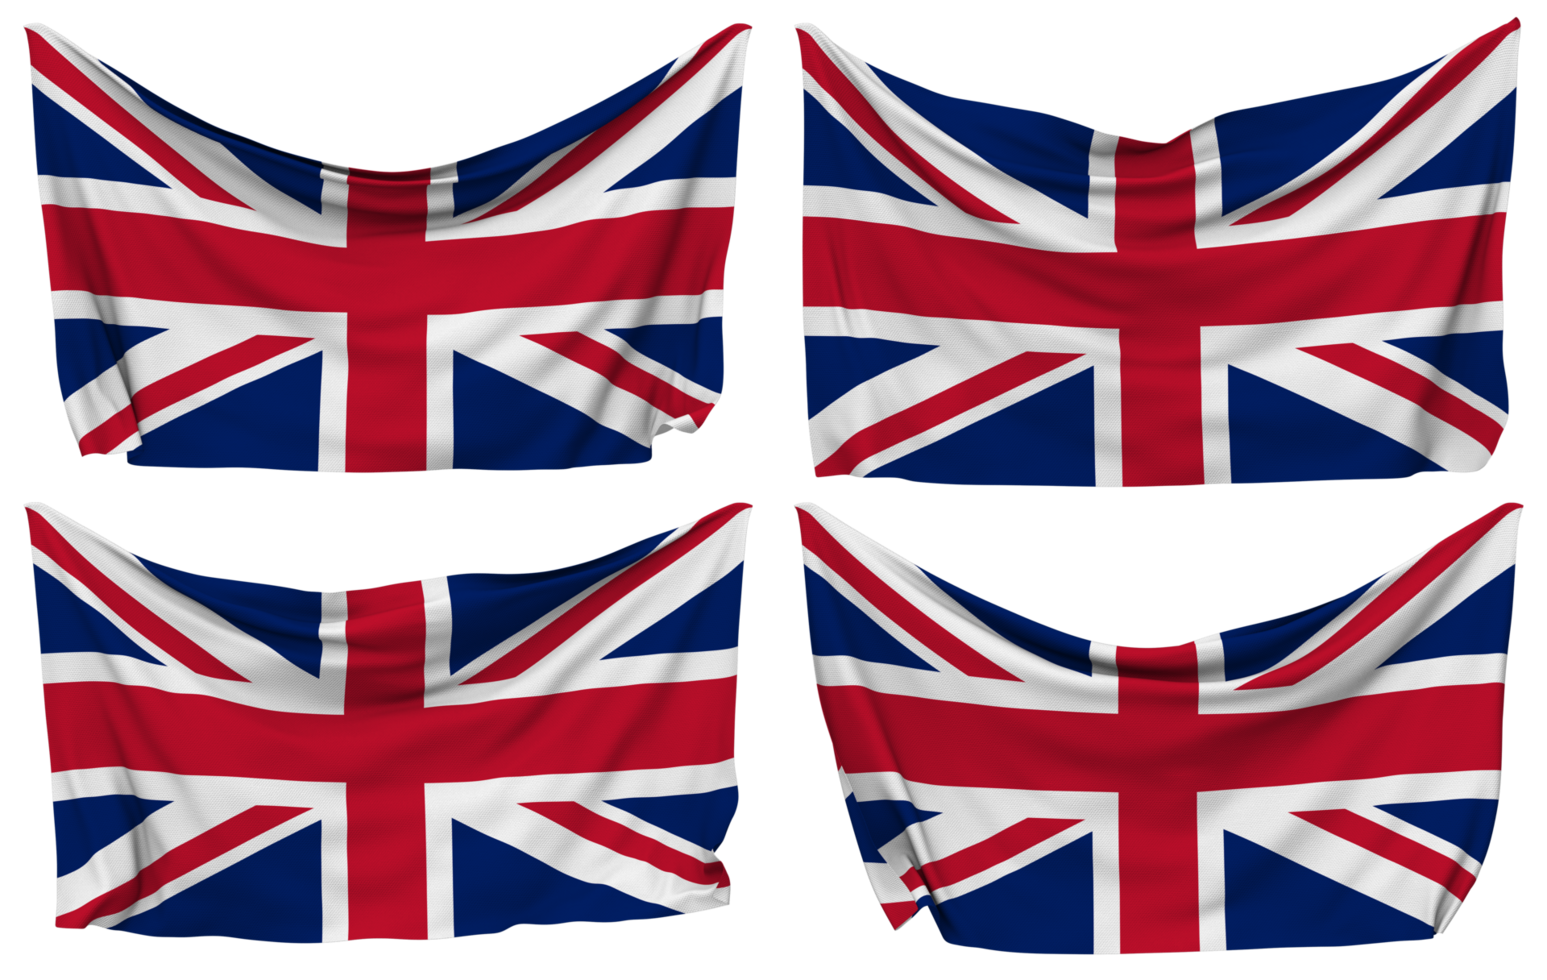 United Kingdom Pinned Flag from Corners, Isolated with Different Waving Variations, 3D Rendering png